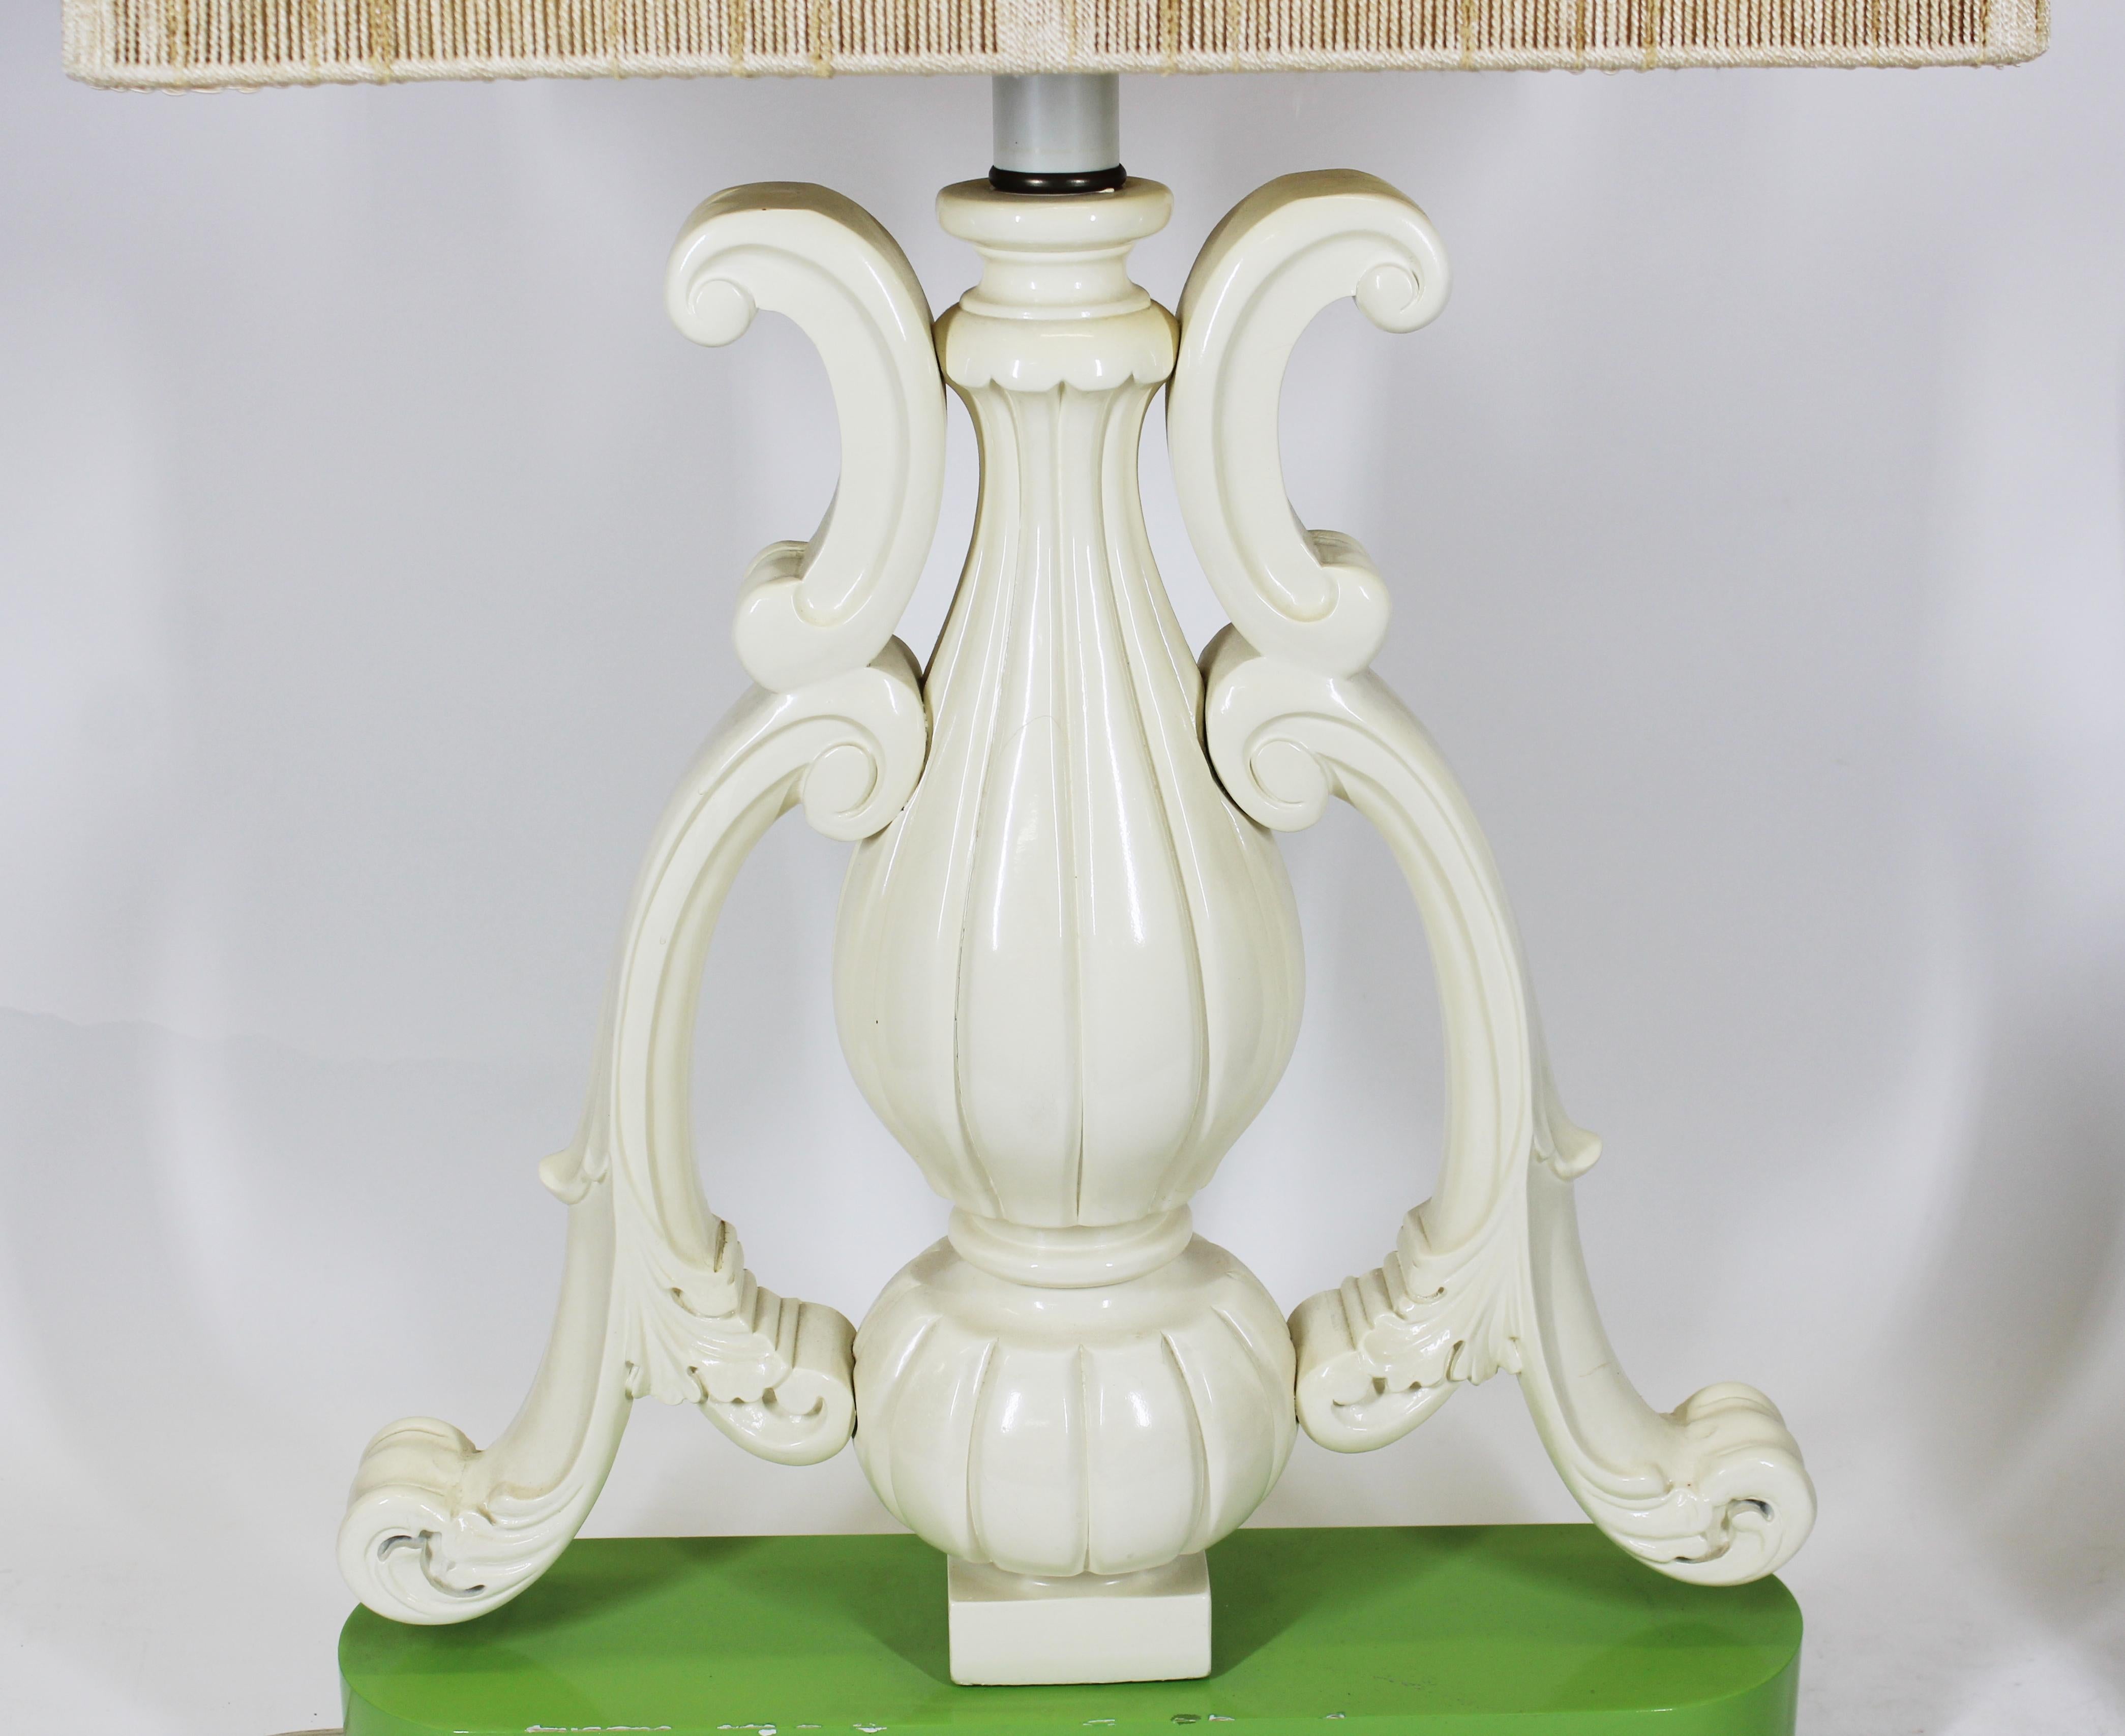 Hollywood Regency or Palm Beach Regency Baroque style vase shaped table lamp in lacquered wood, on lacquered green base, with original shade. Wear and tears to the inside of the original shade.